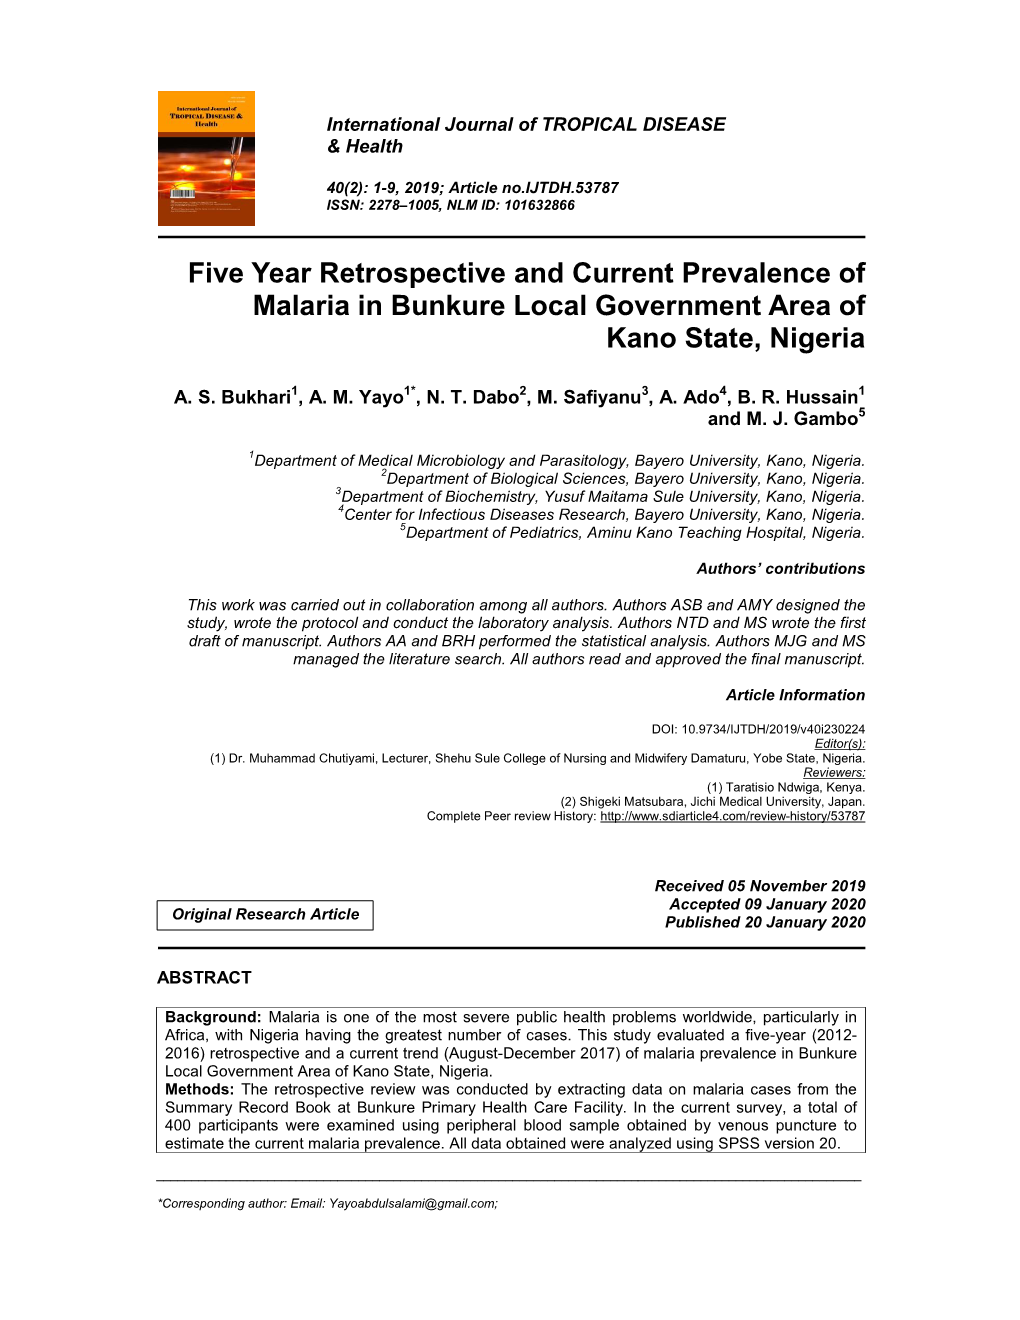 Five Year Retrospective and Current Prevalence of Malaria in Bunkure Local Government Area of Kano State, Nigeria